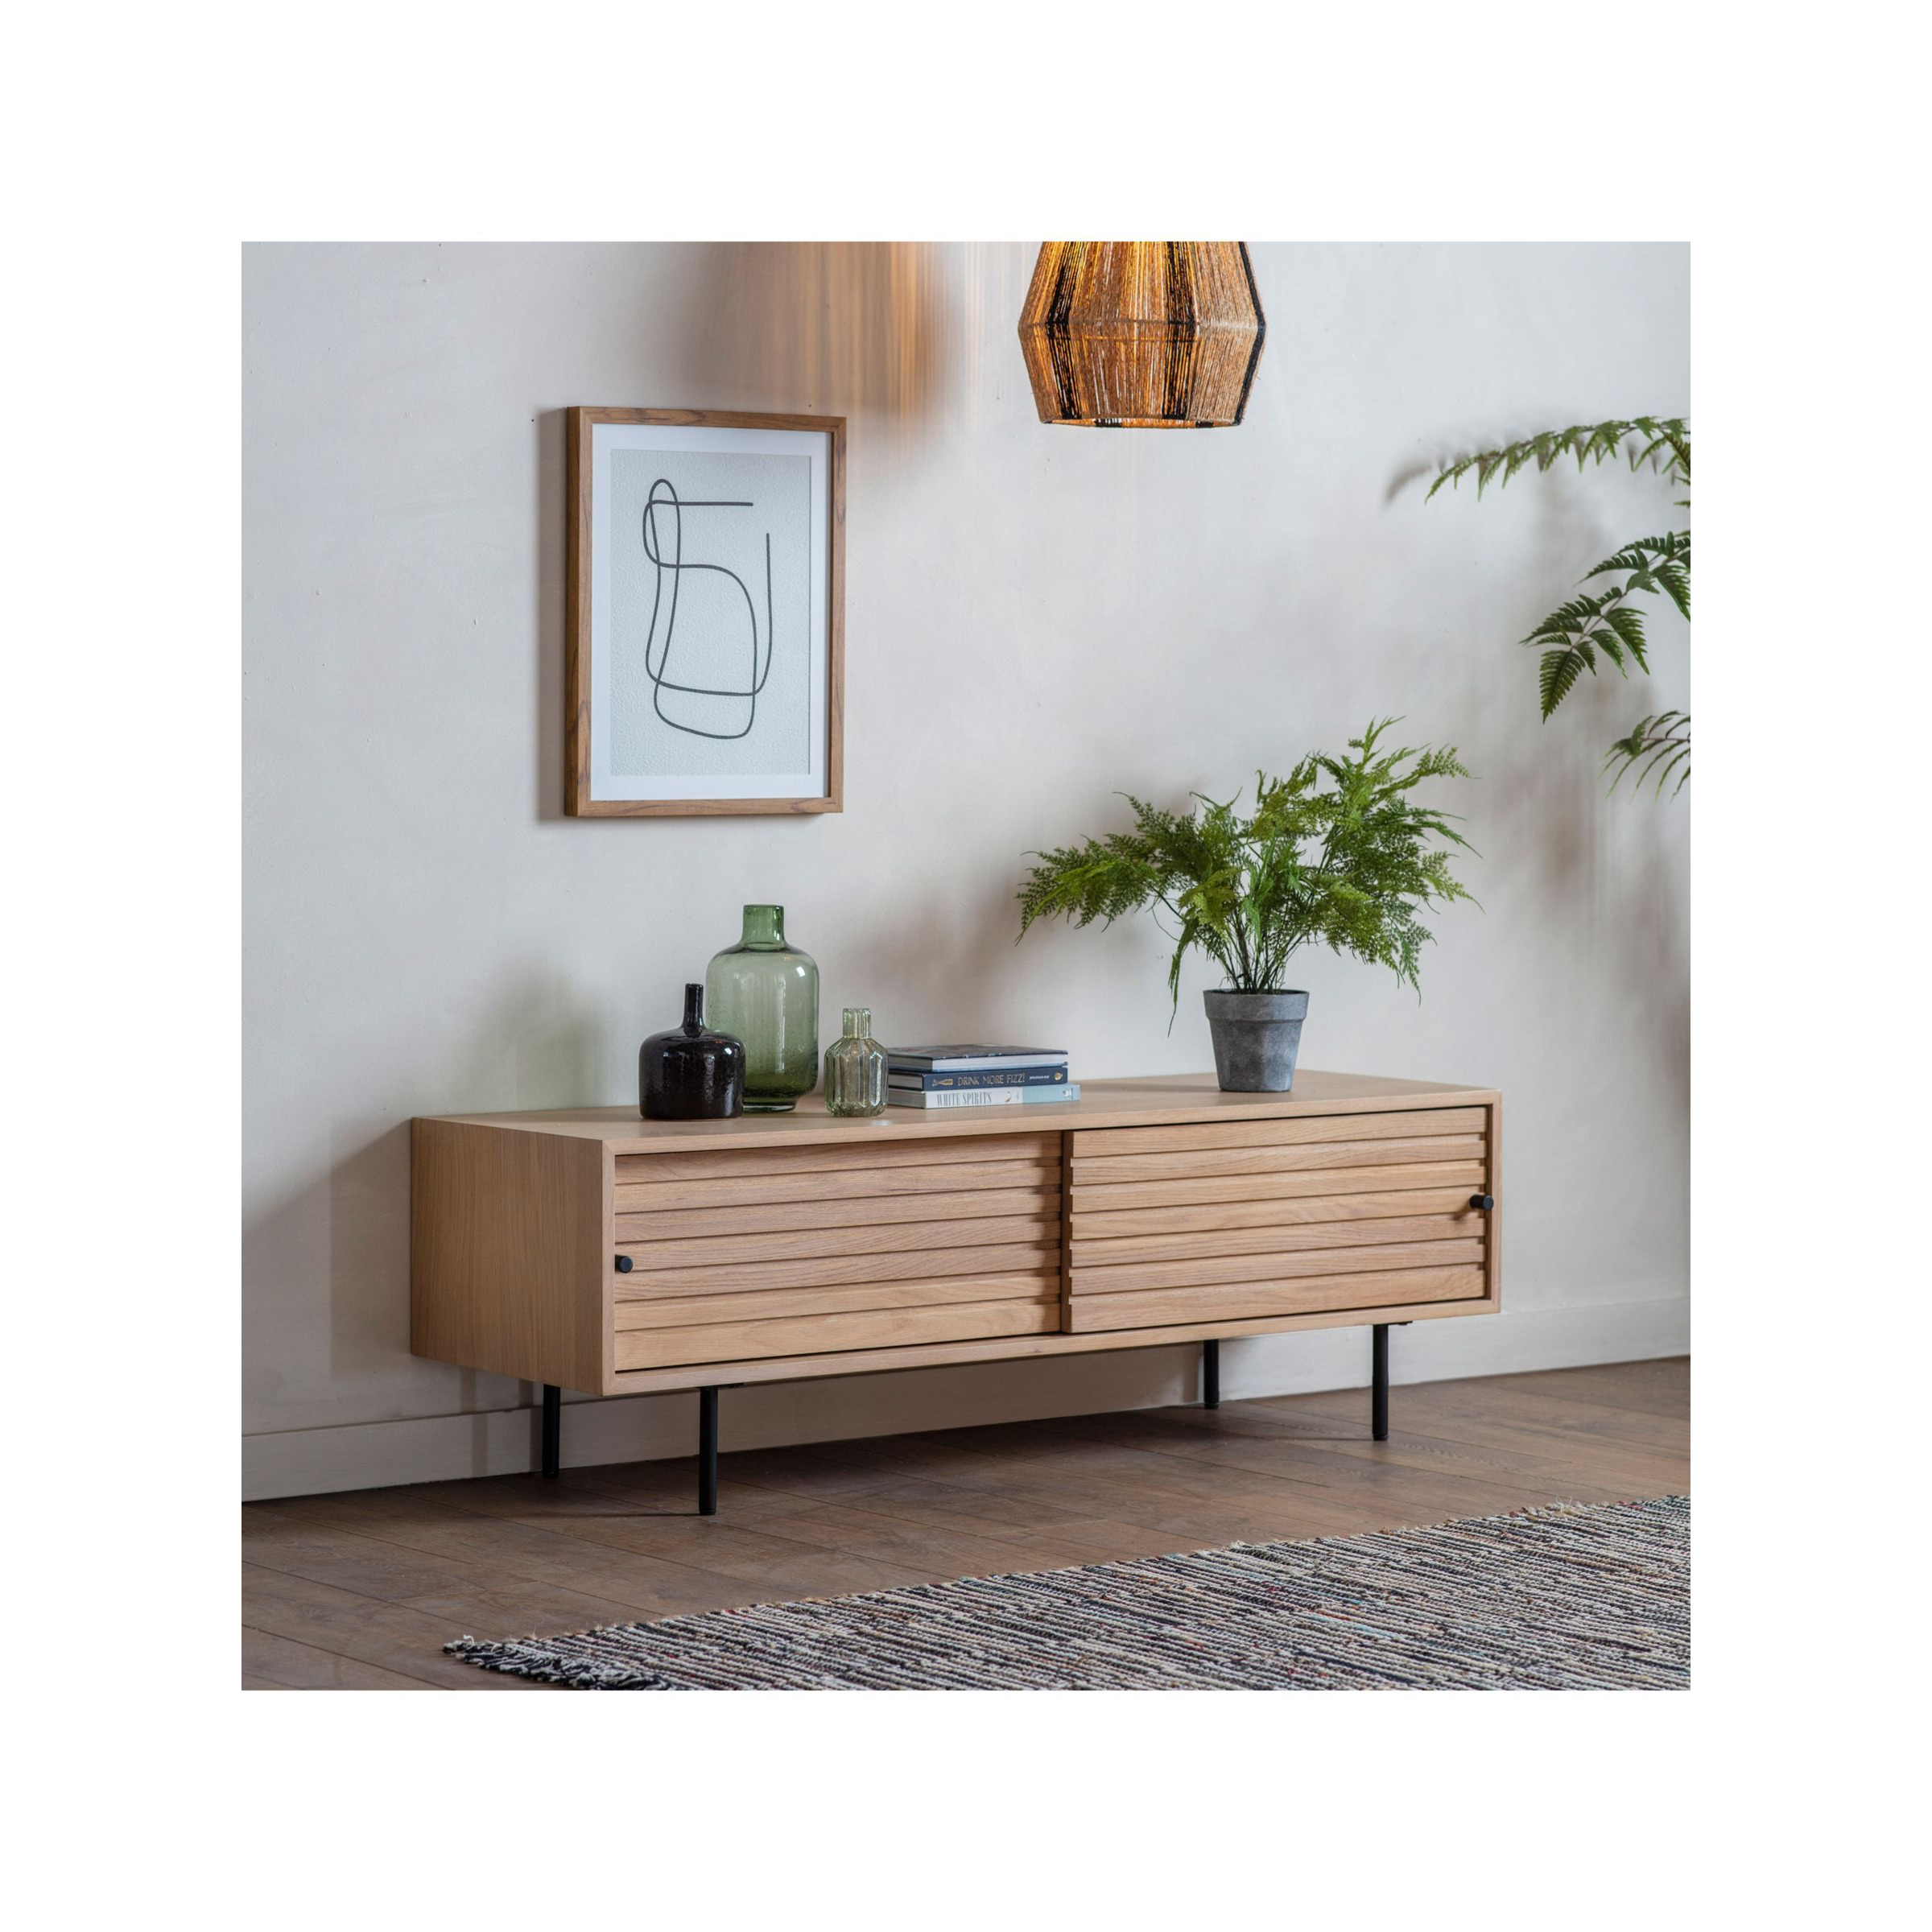 Gallery Direct Foxley TV Stand, Oak - image 1